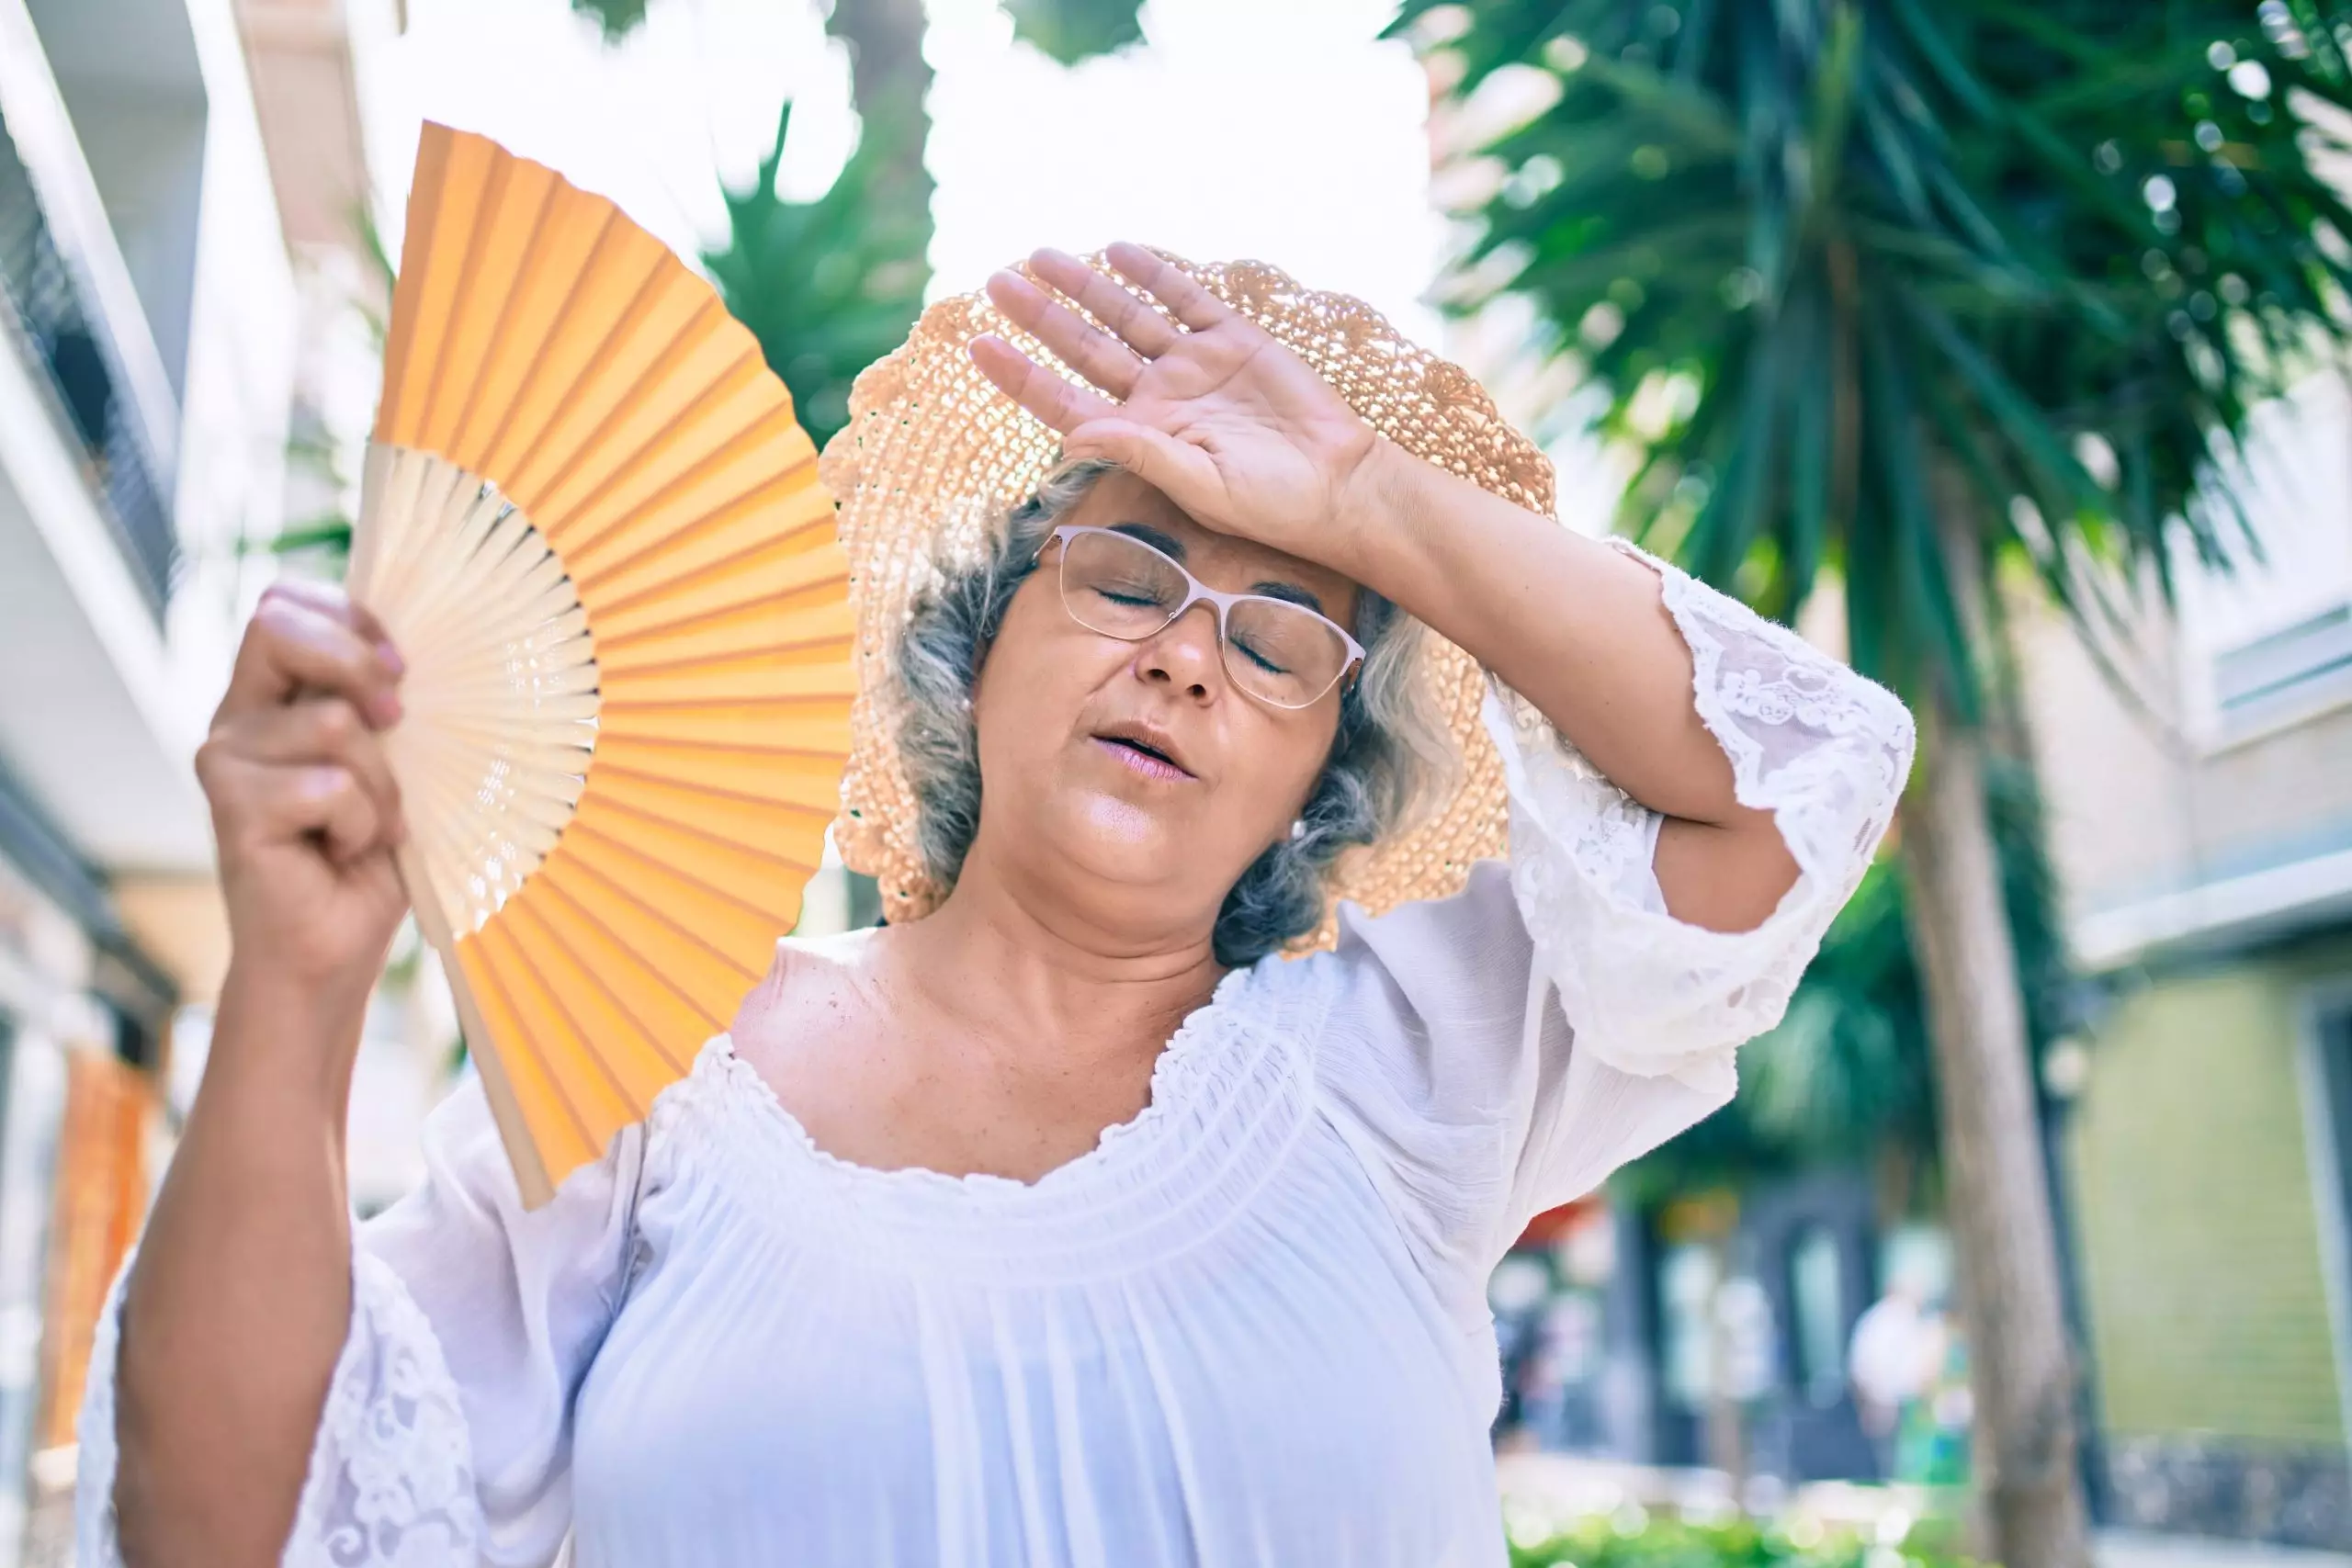 Middle Age Woman With Grey Hair Using Handfan To Cool Down